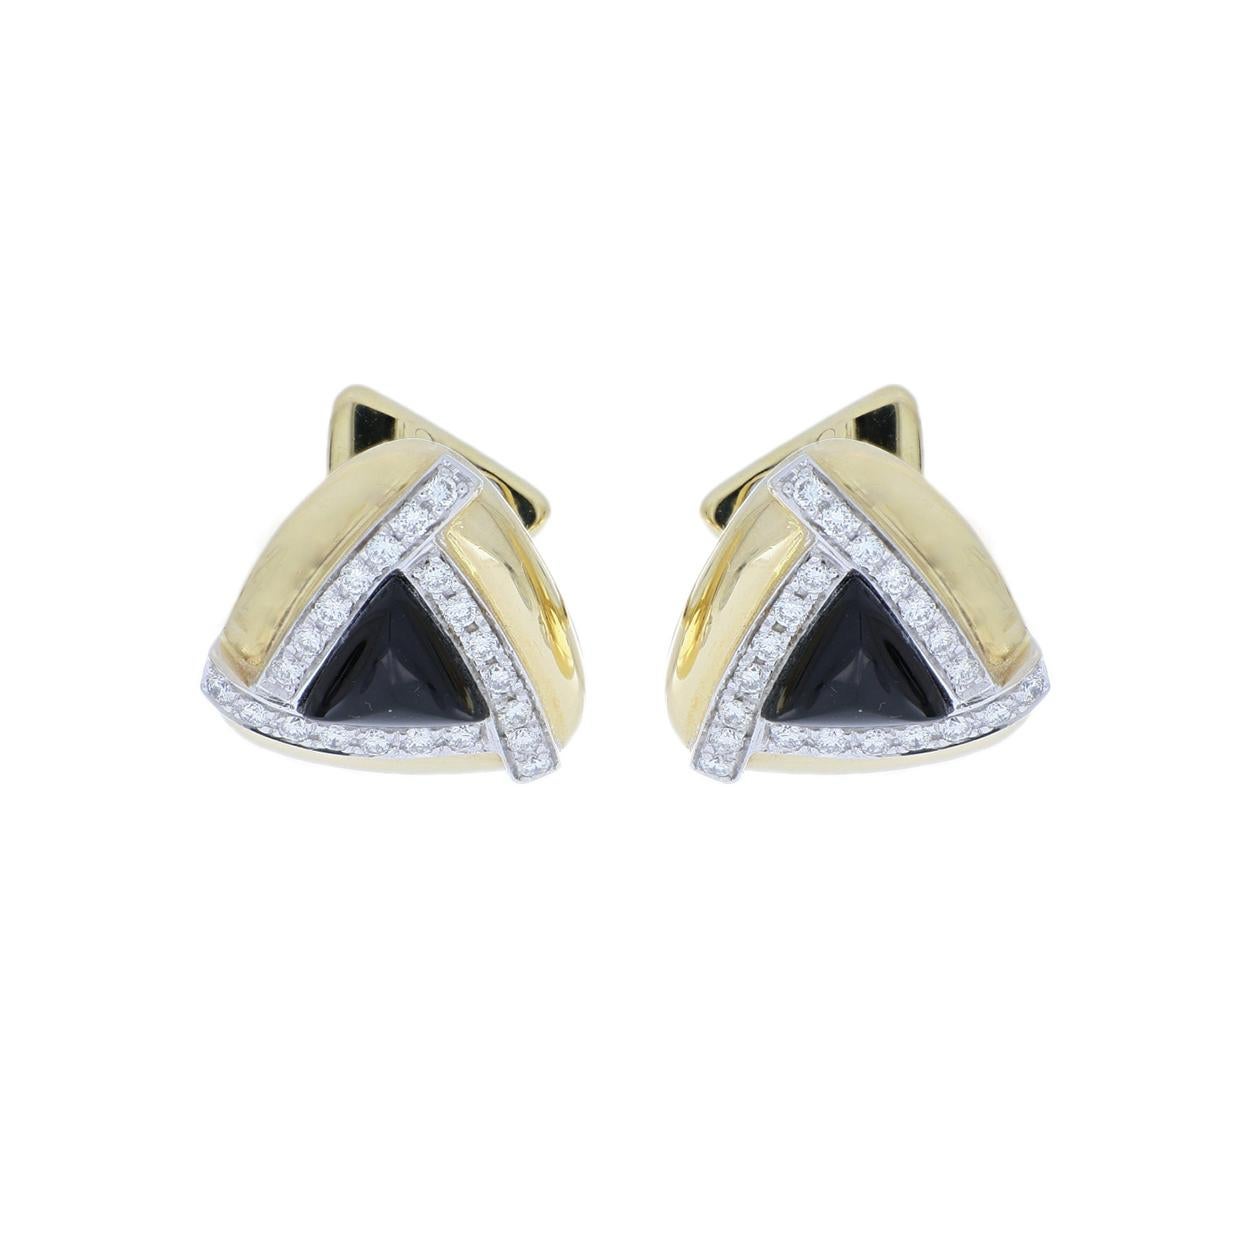 Man's Onyx and White Diamonds Wedding Cufflinks in 18 K Yellow Gold For Sale 1